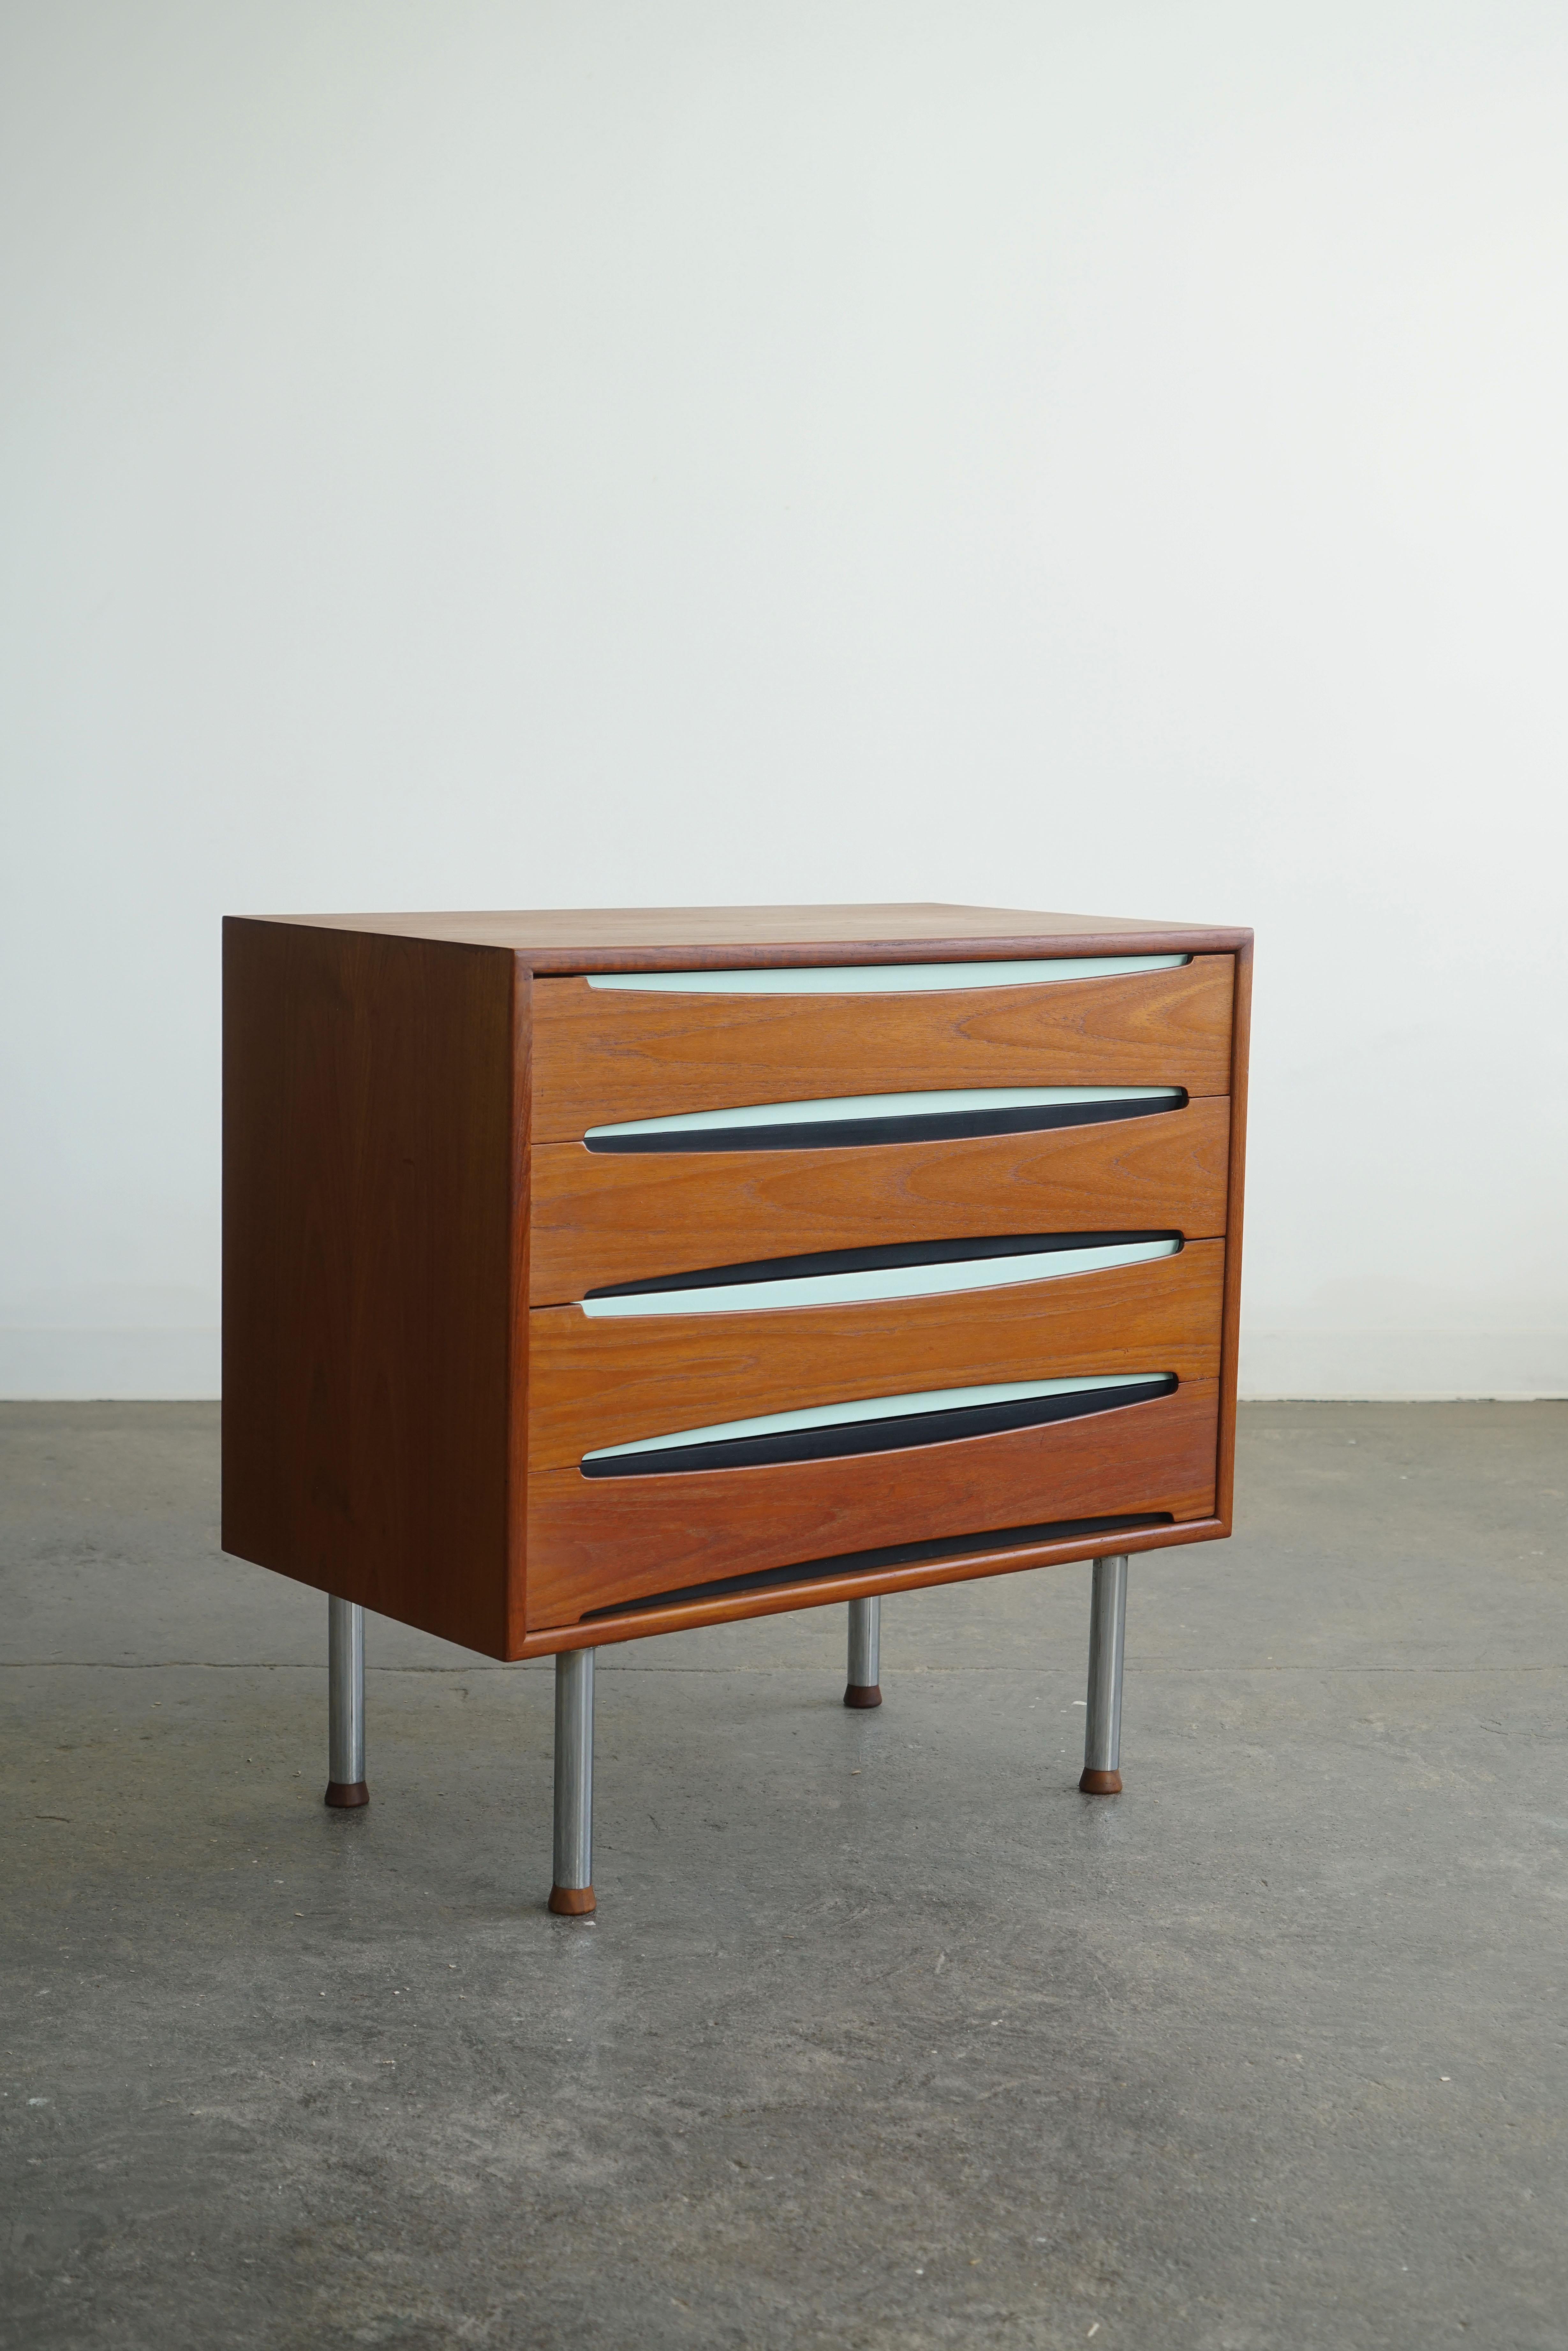 Teak cabinet/chest in the manner of Arne Vodder.
Sweden, circa 1965
Teak, chrome-plated steel legs, and lacquered paint.
Features (4) drawers.

31